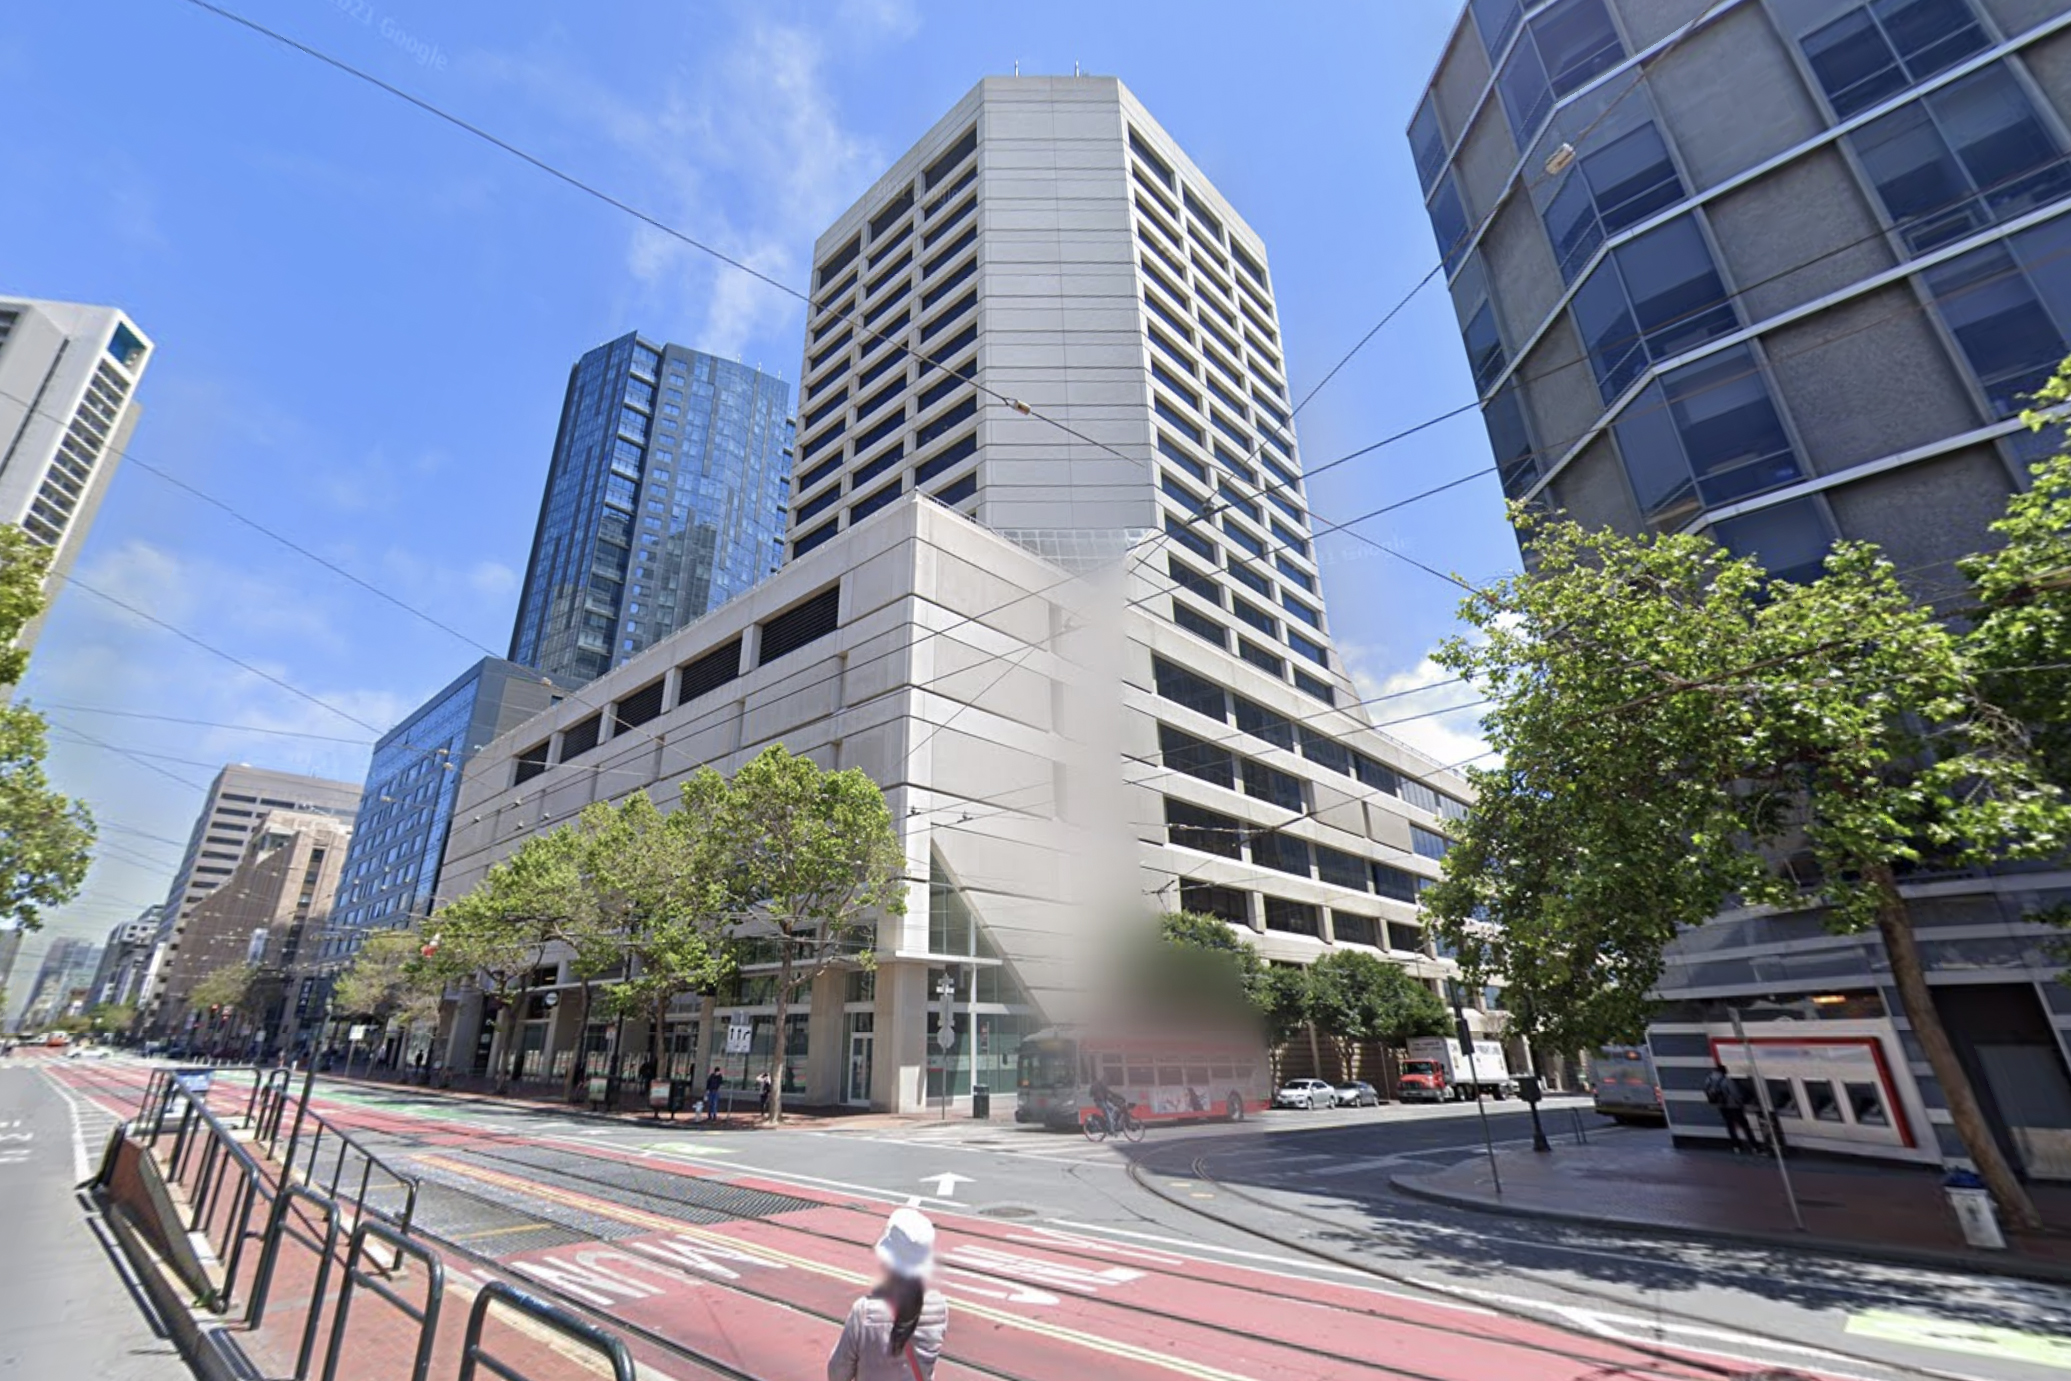 Here Are the Tech Companies That Vacated the Most San Francisco Office Space